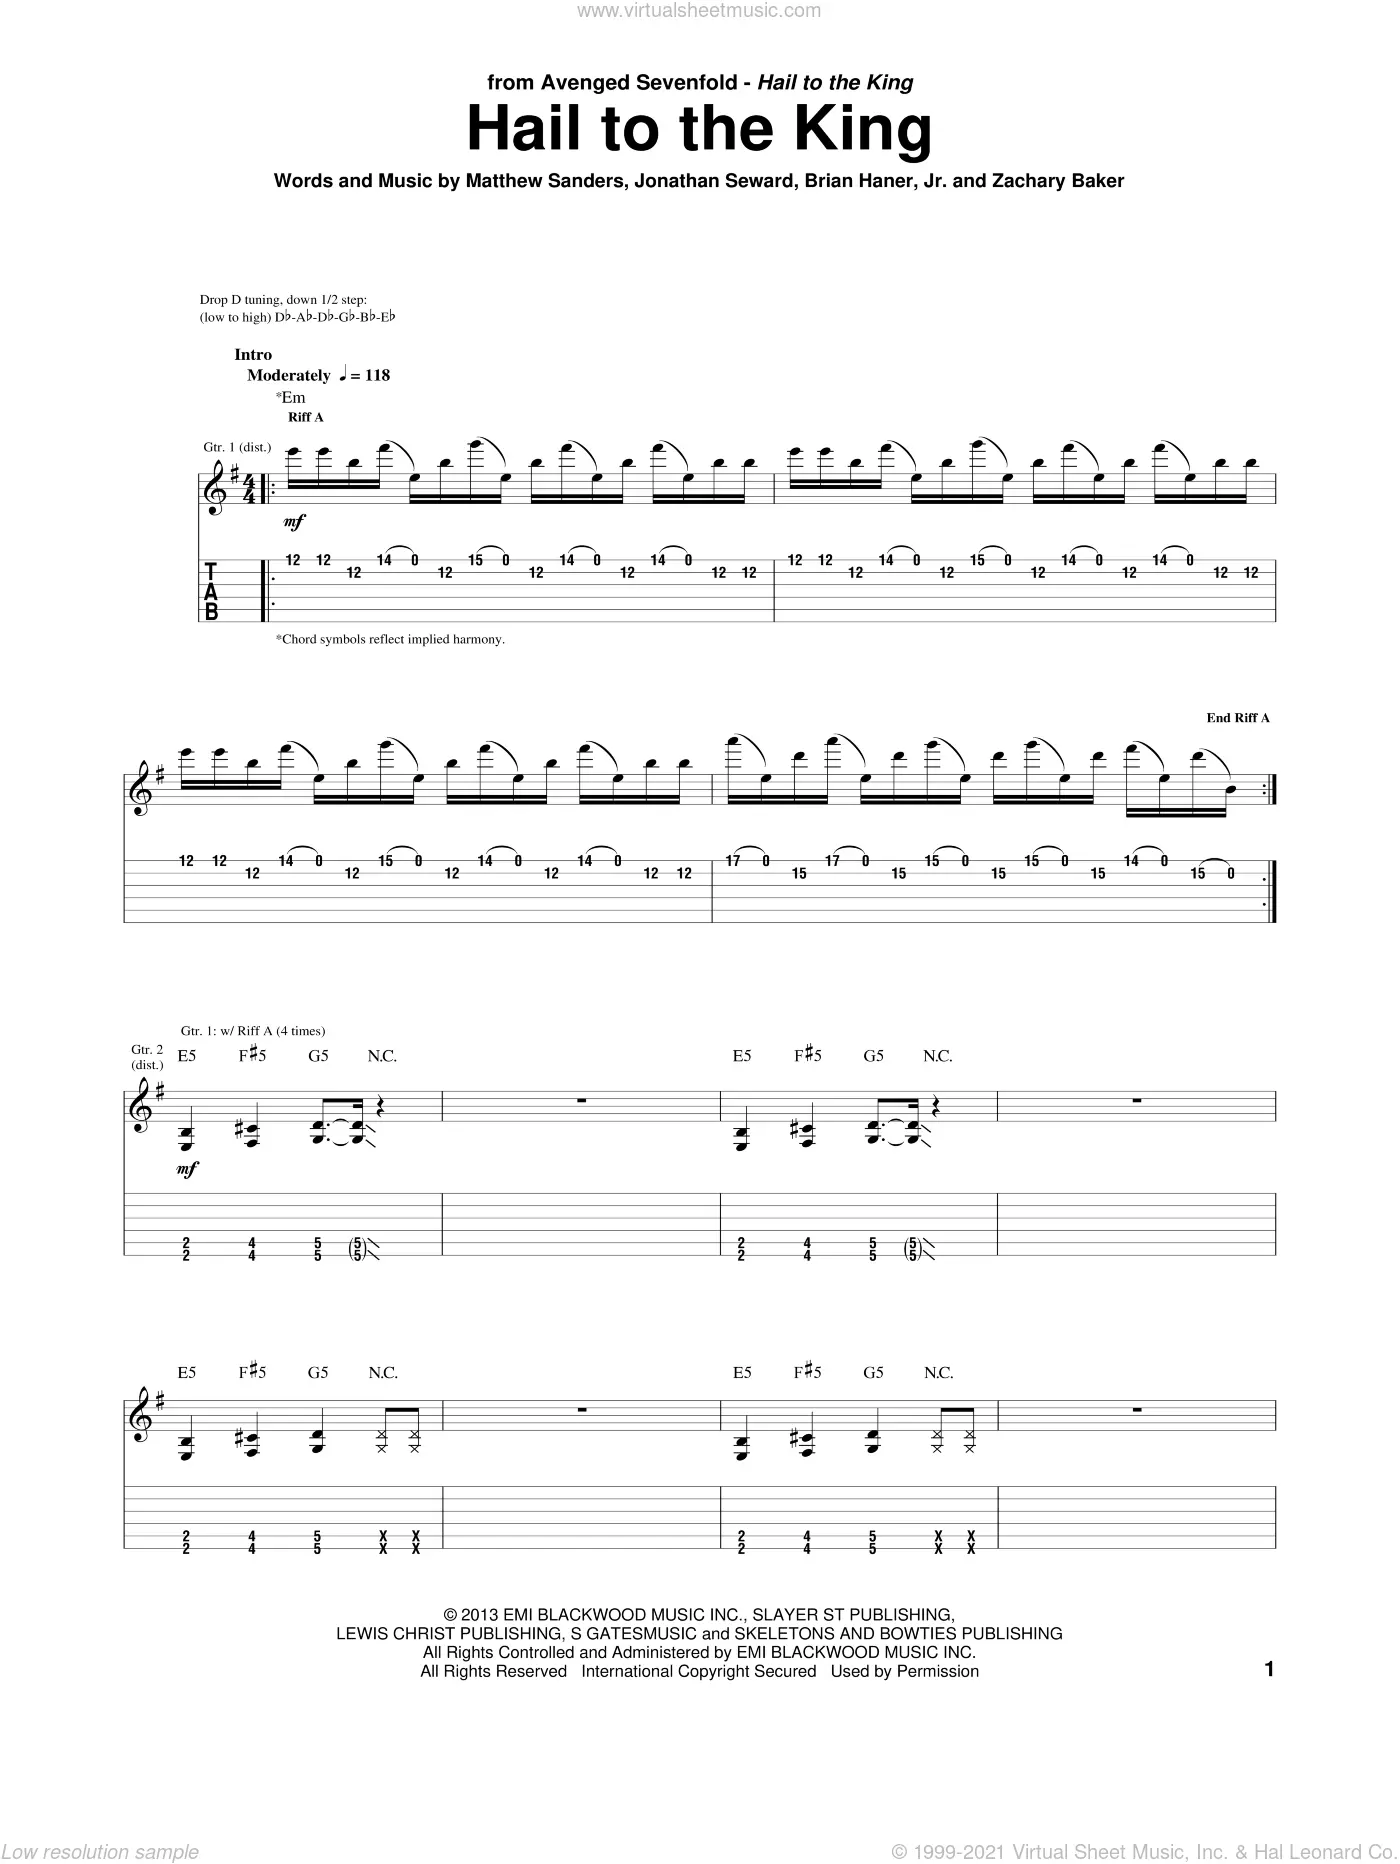 Avenged Sevenfold Afterlife Piano Arrangement Sheet music for Piano (Solo)